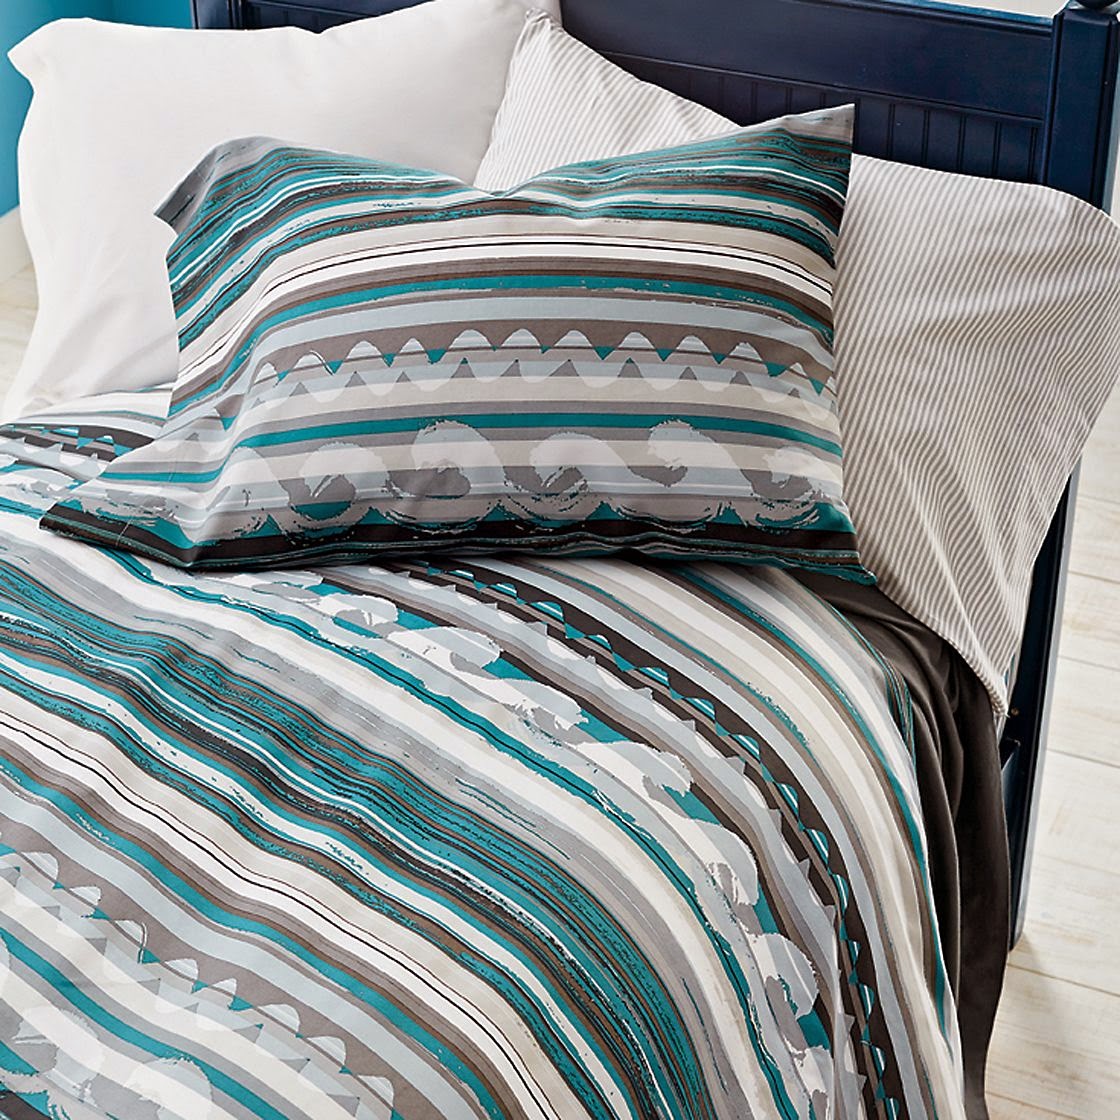 The Company Store nautical bedding Spring 2014